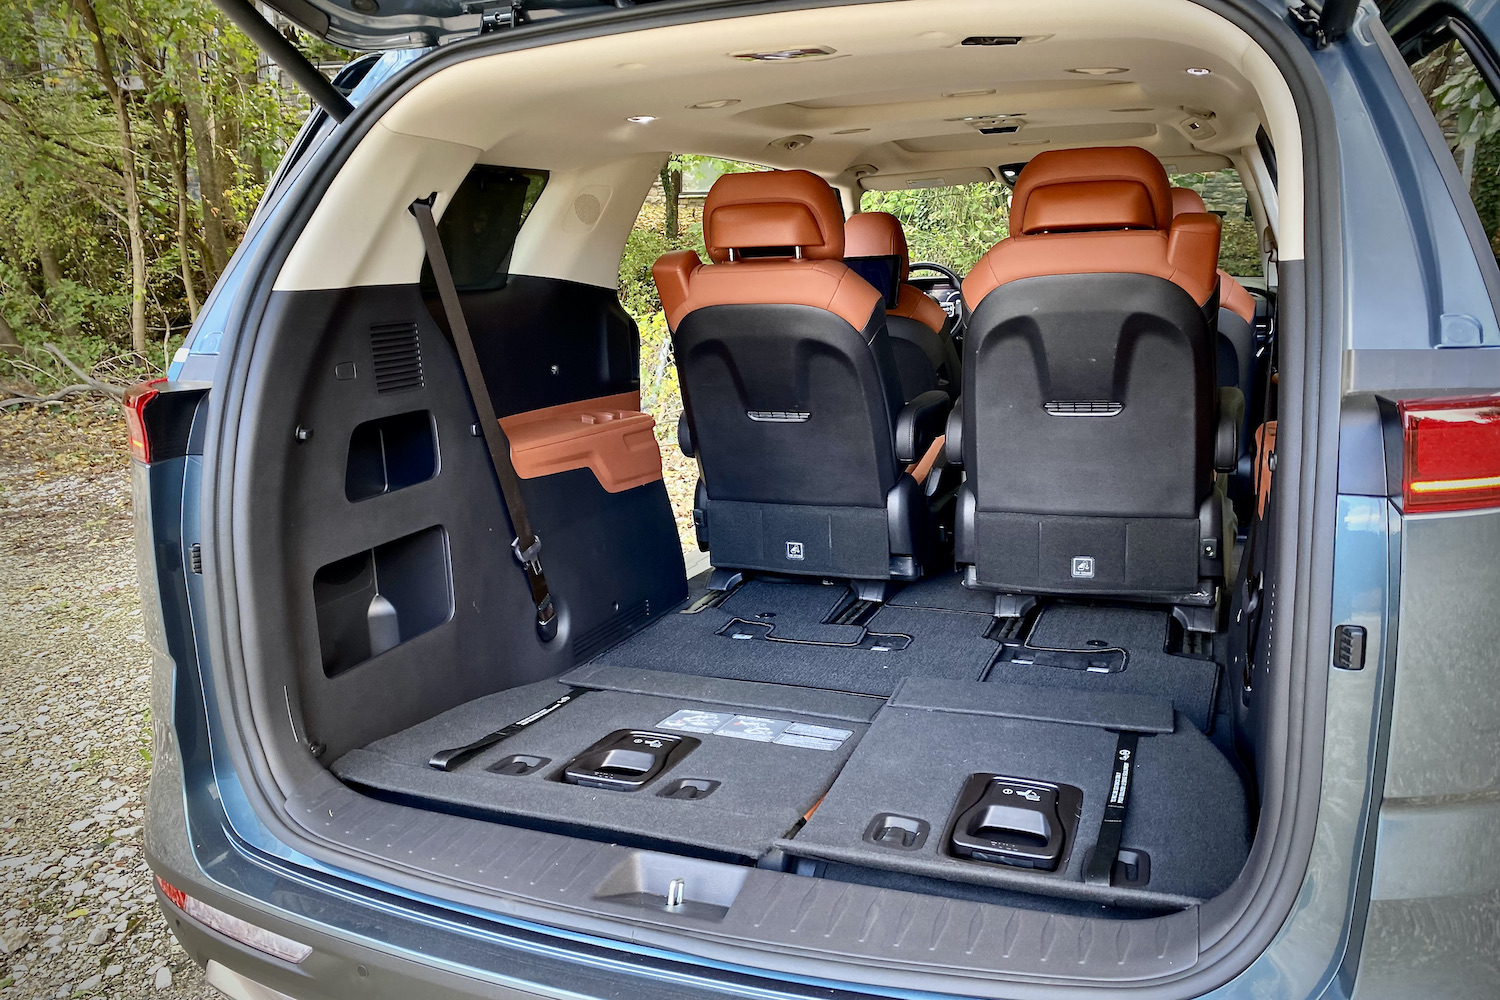 Kia Carnival cargo area with third-row seats stowed and liftgate open.